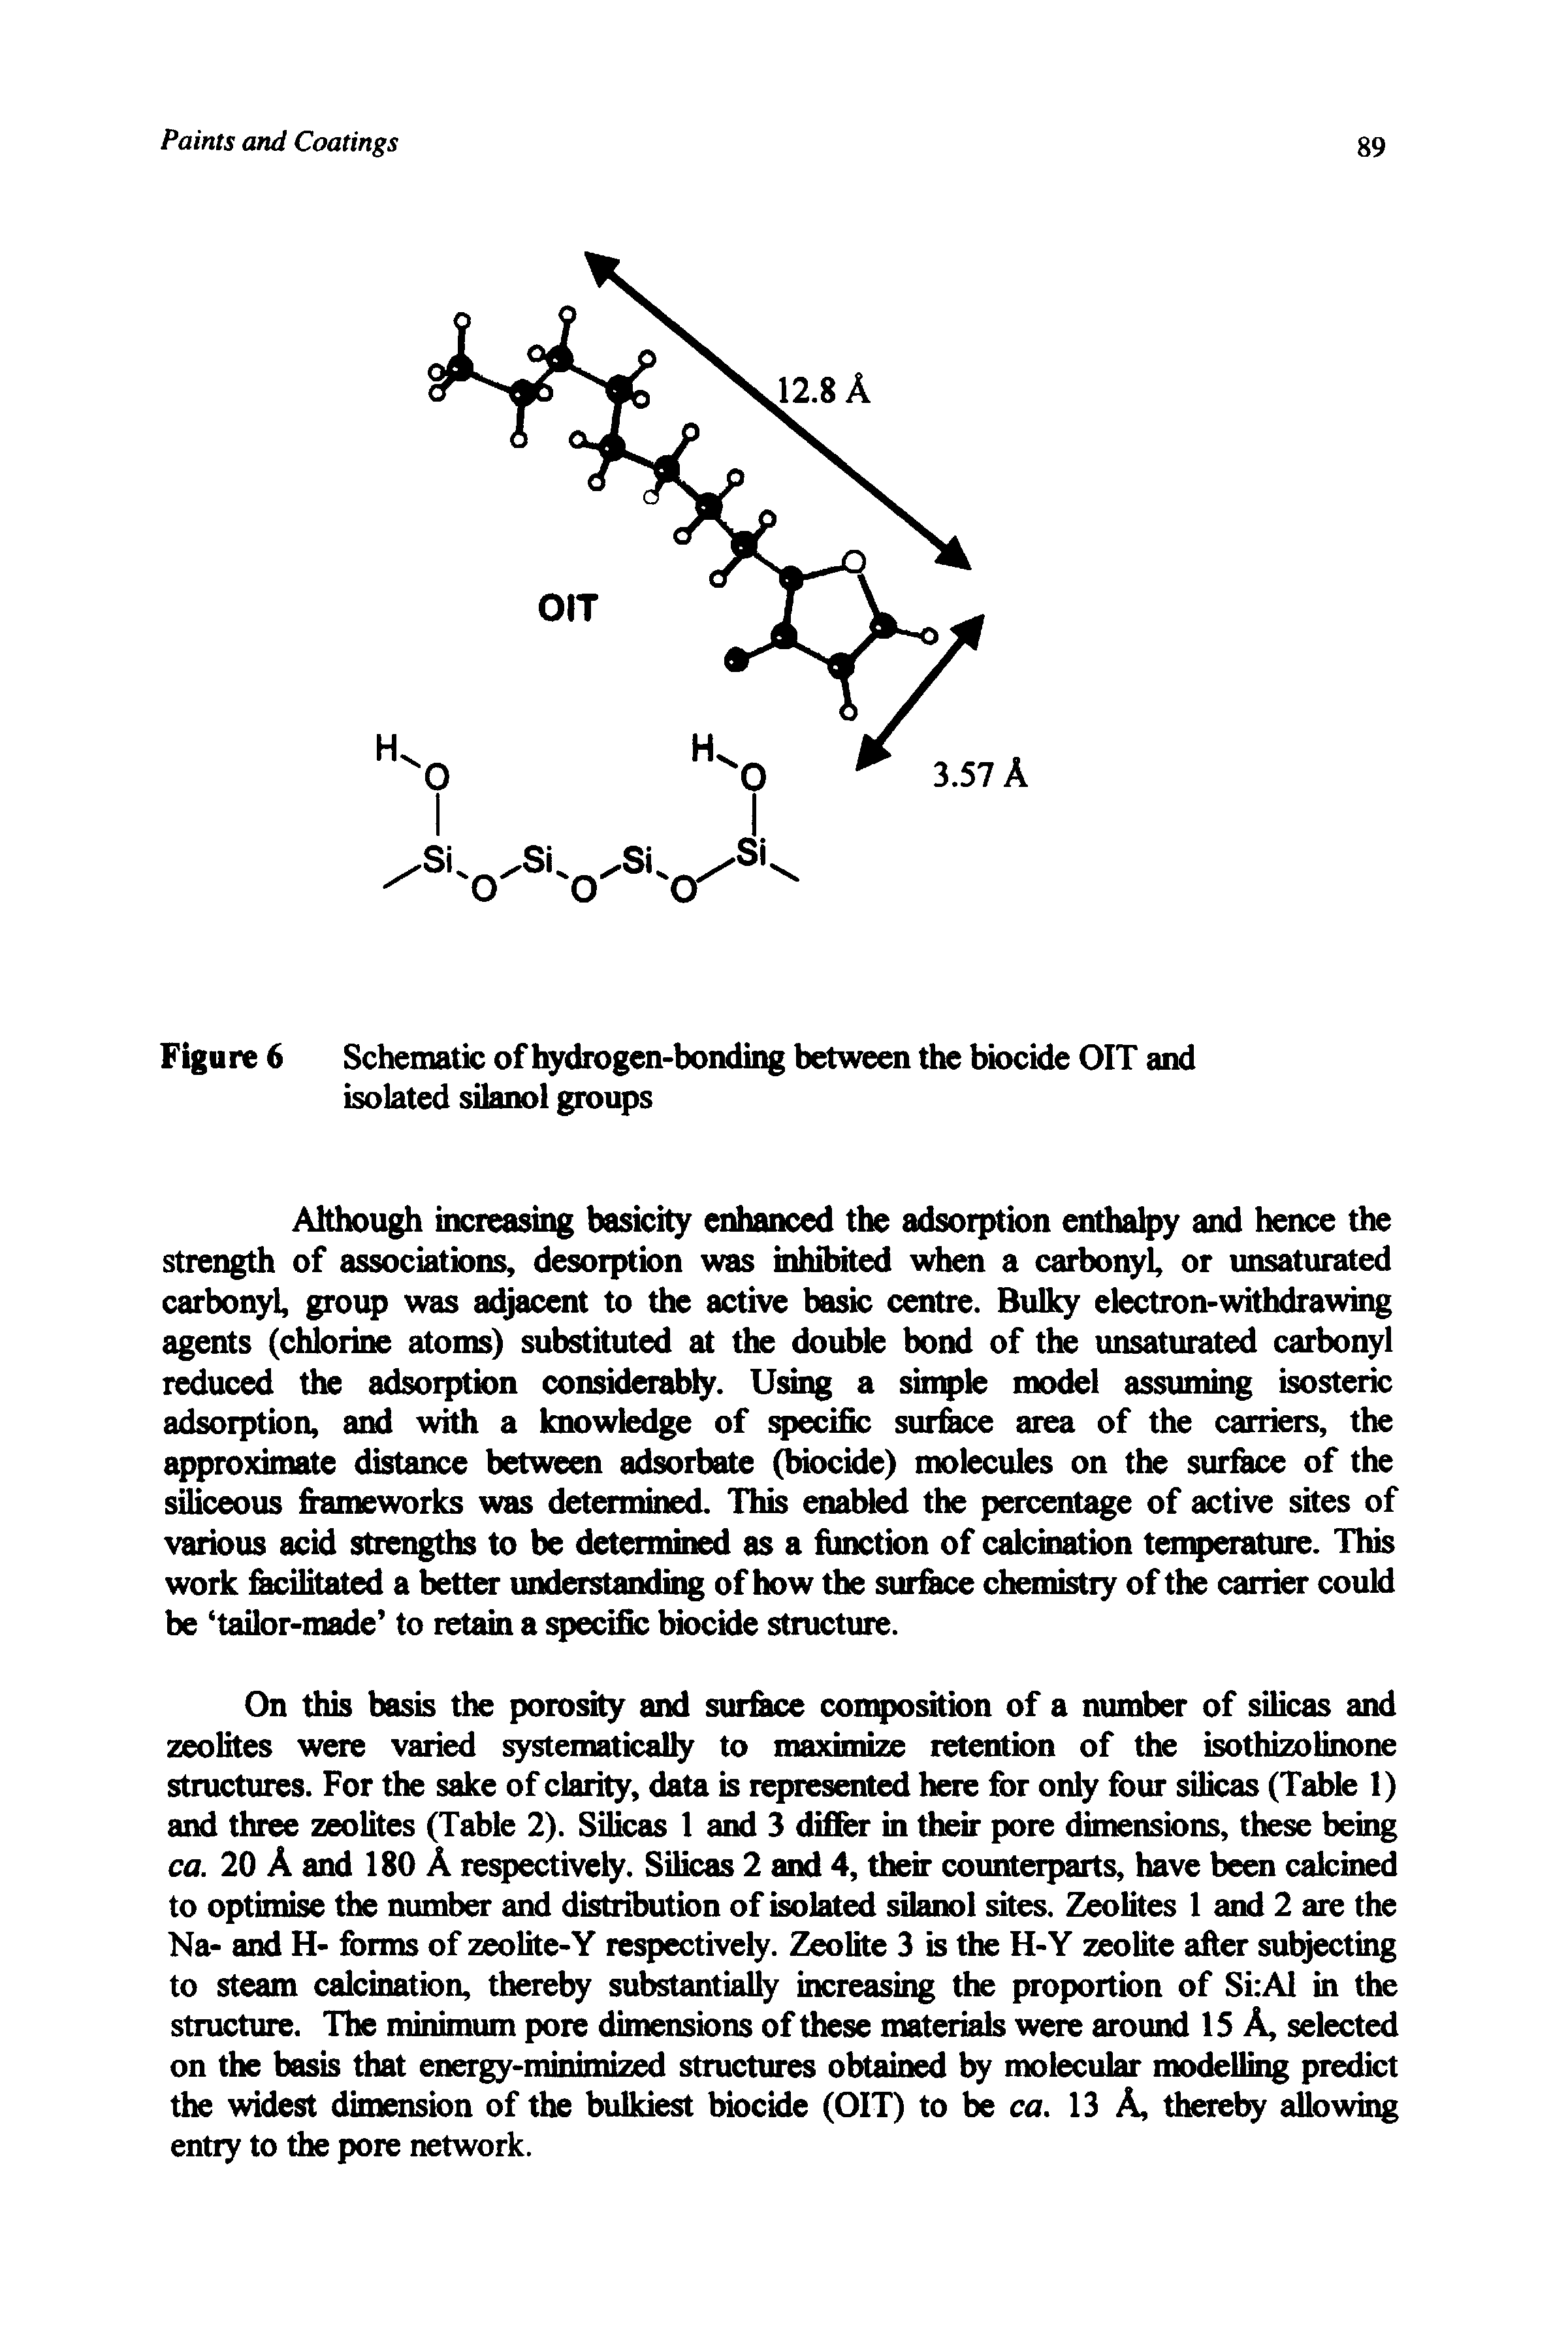 Figure 6 Schematic of hydrogen-bonding between the biocide OIT and isolated silanol groups...